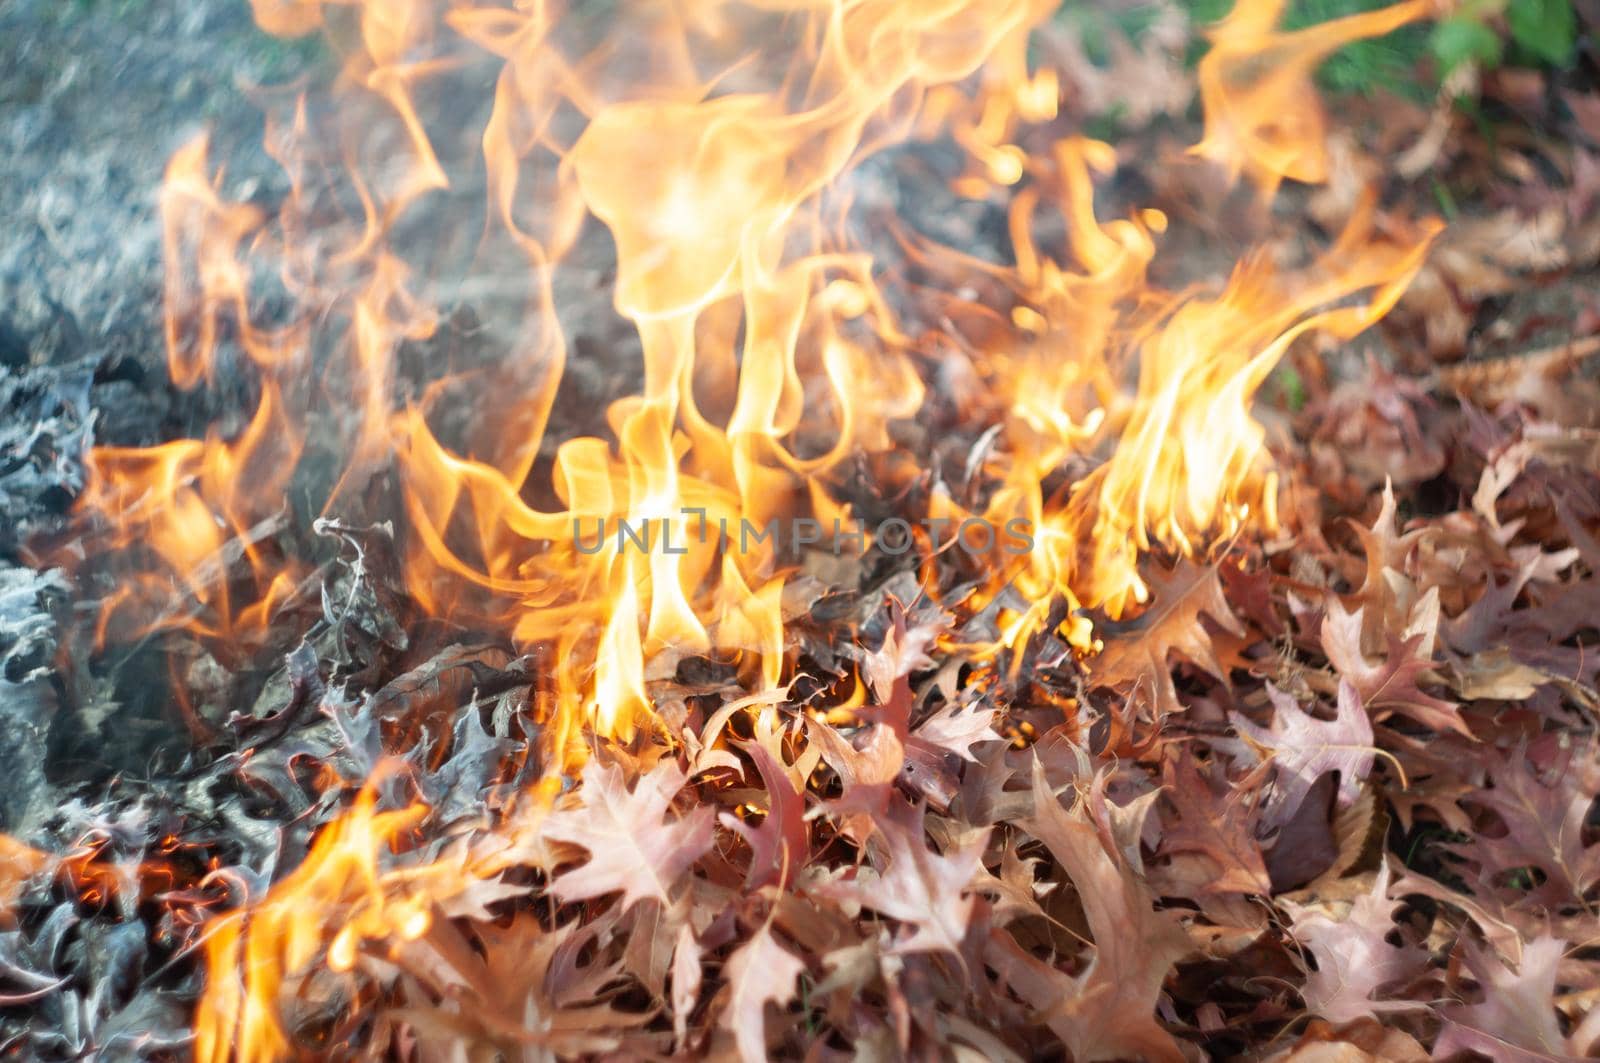 Burning fallen sick leaves in fire, Sanitary cleaning of the autumn garden by KaterinaDalemans